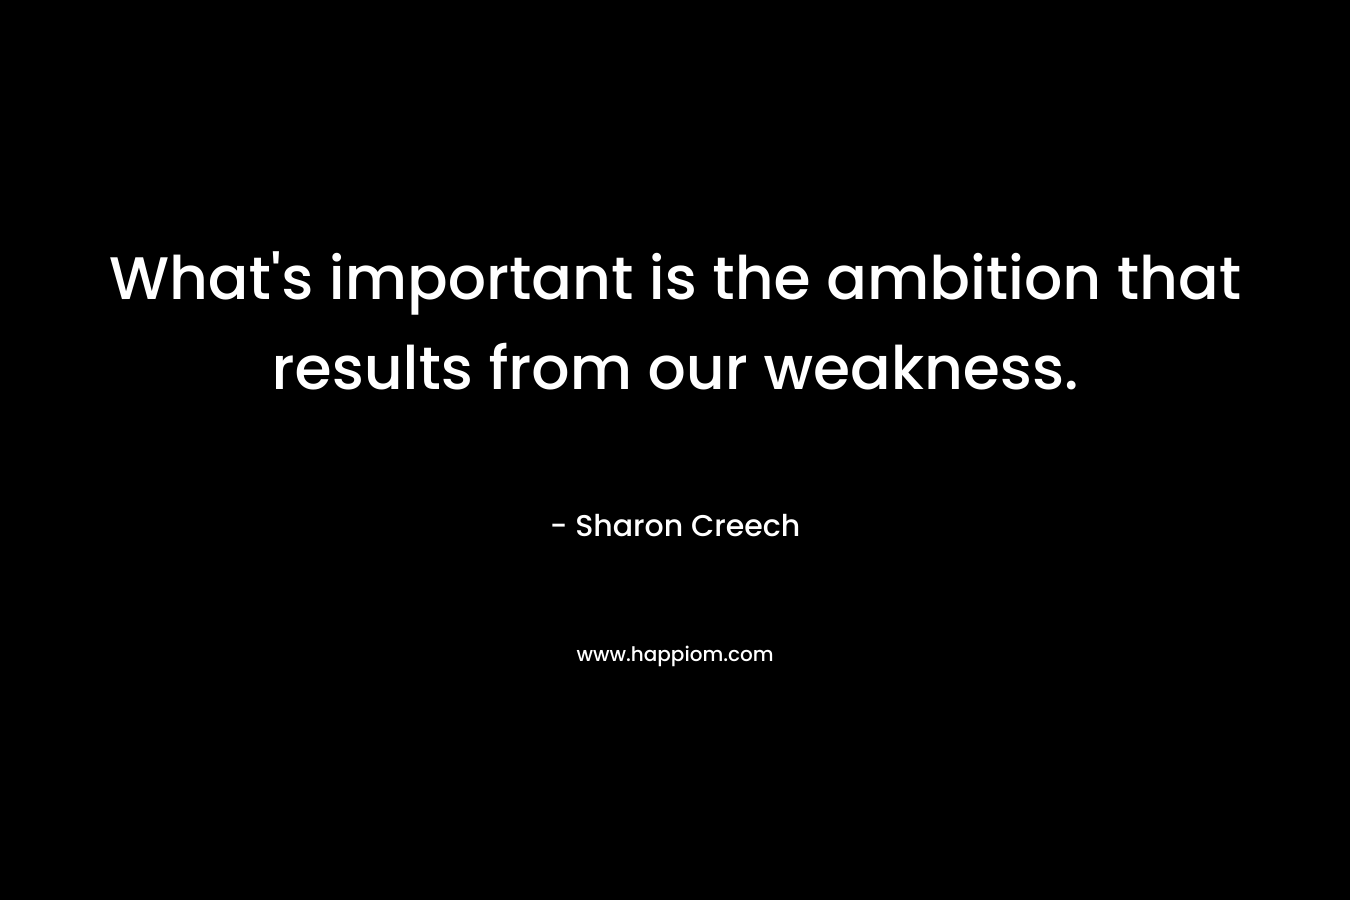 What’s important is the ambition that results from our weakness. – Sharon Creech